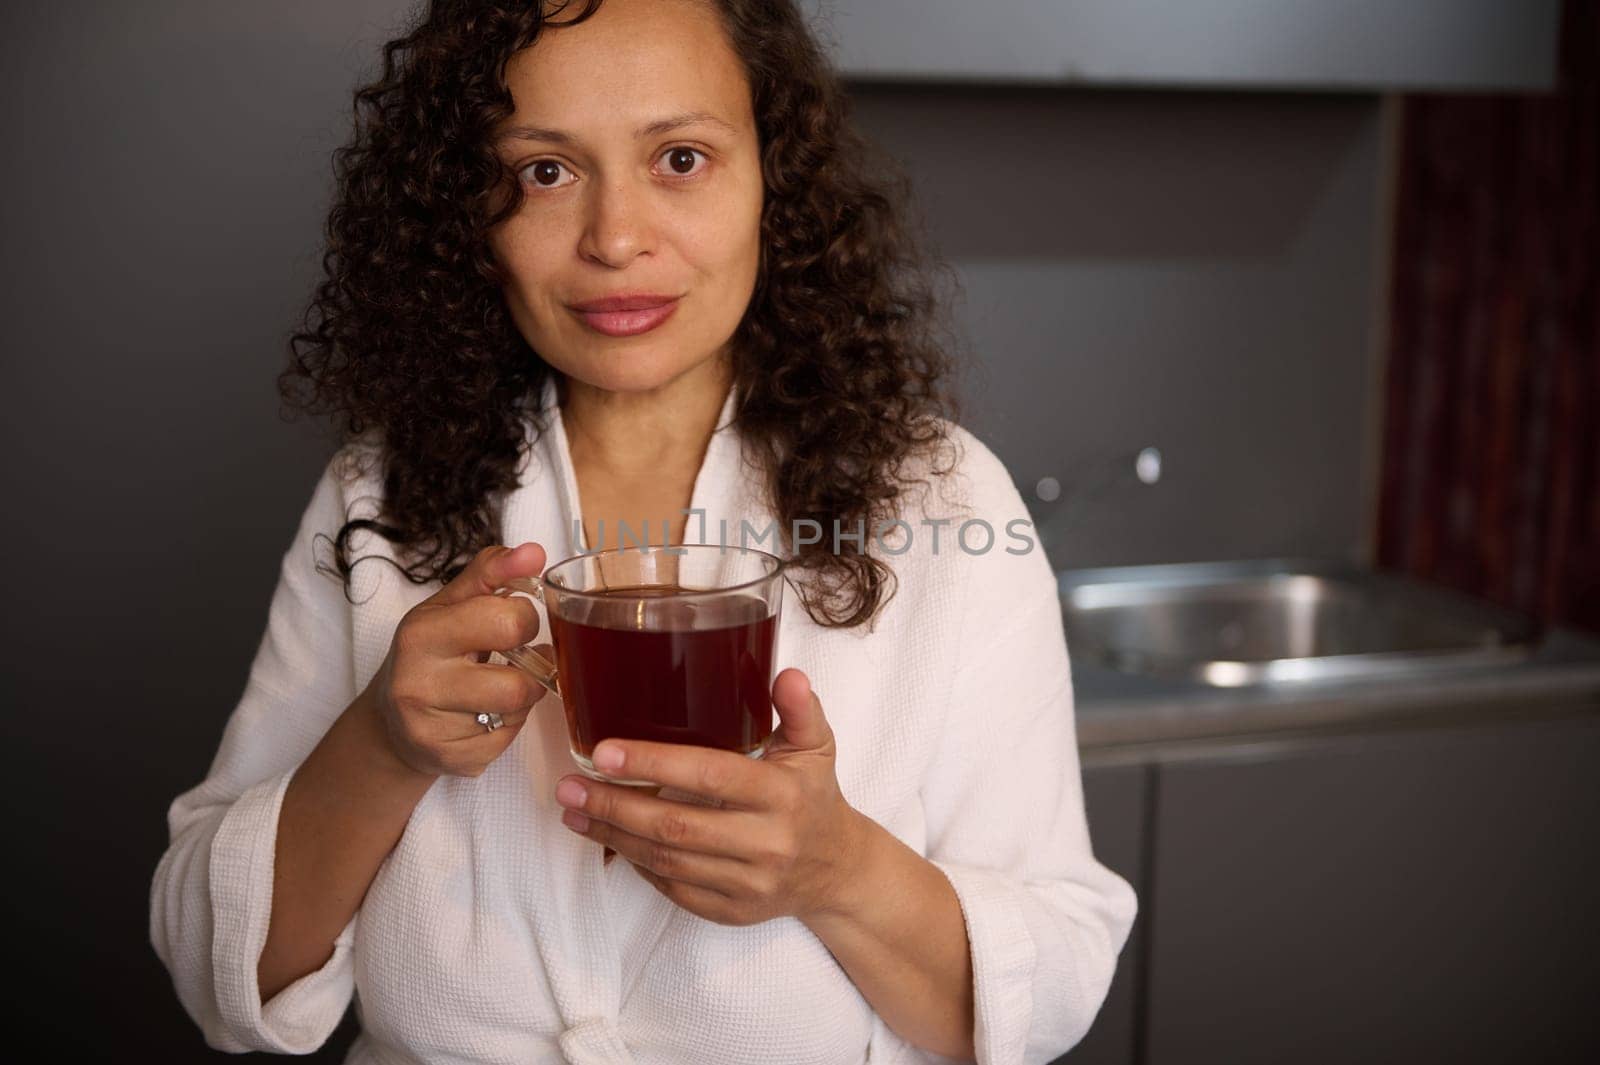 Attractive curly haired brunette woman in white bathrobe, holding a cup of hot tea drink, smiling looking at camera by artgf